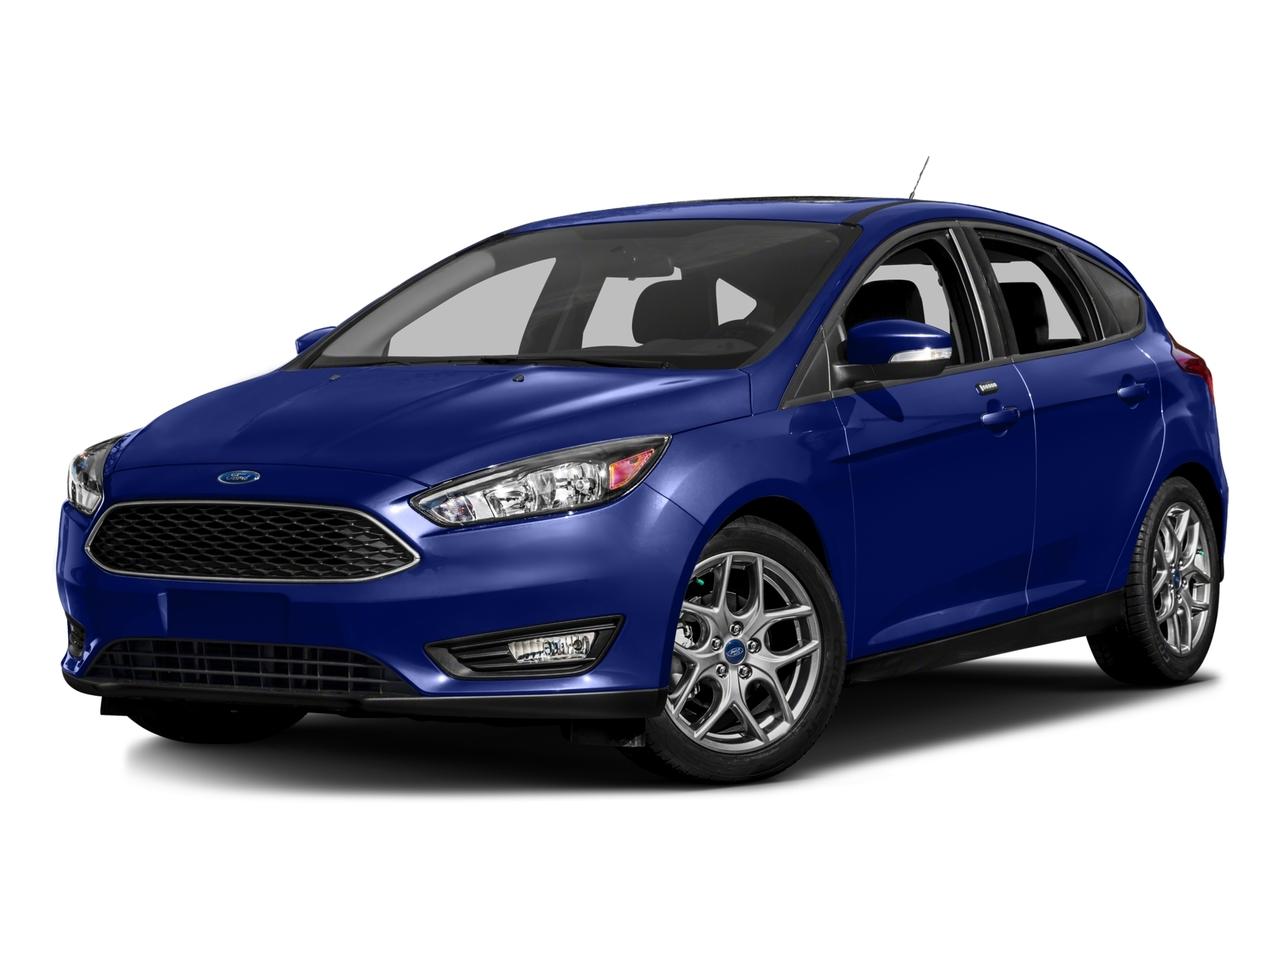 2016 Ford Focus Vehicle Photo in Saint Charles, IL 60174